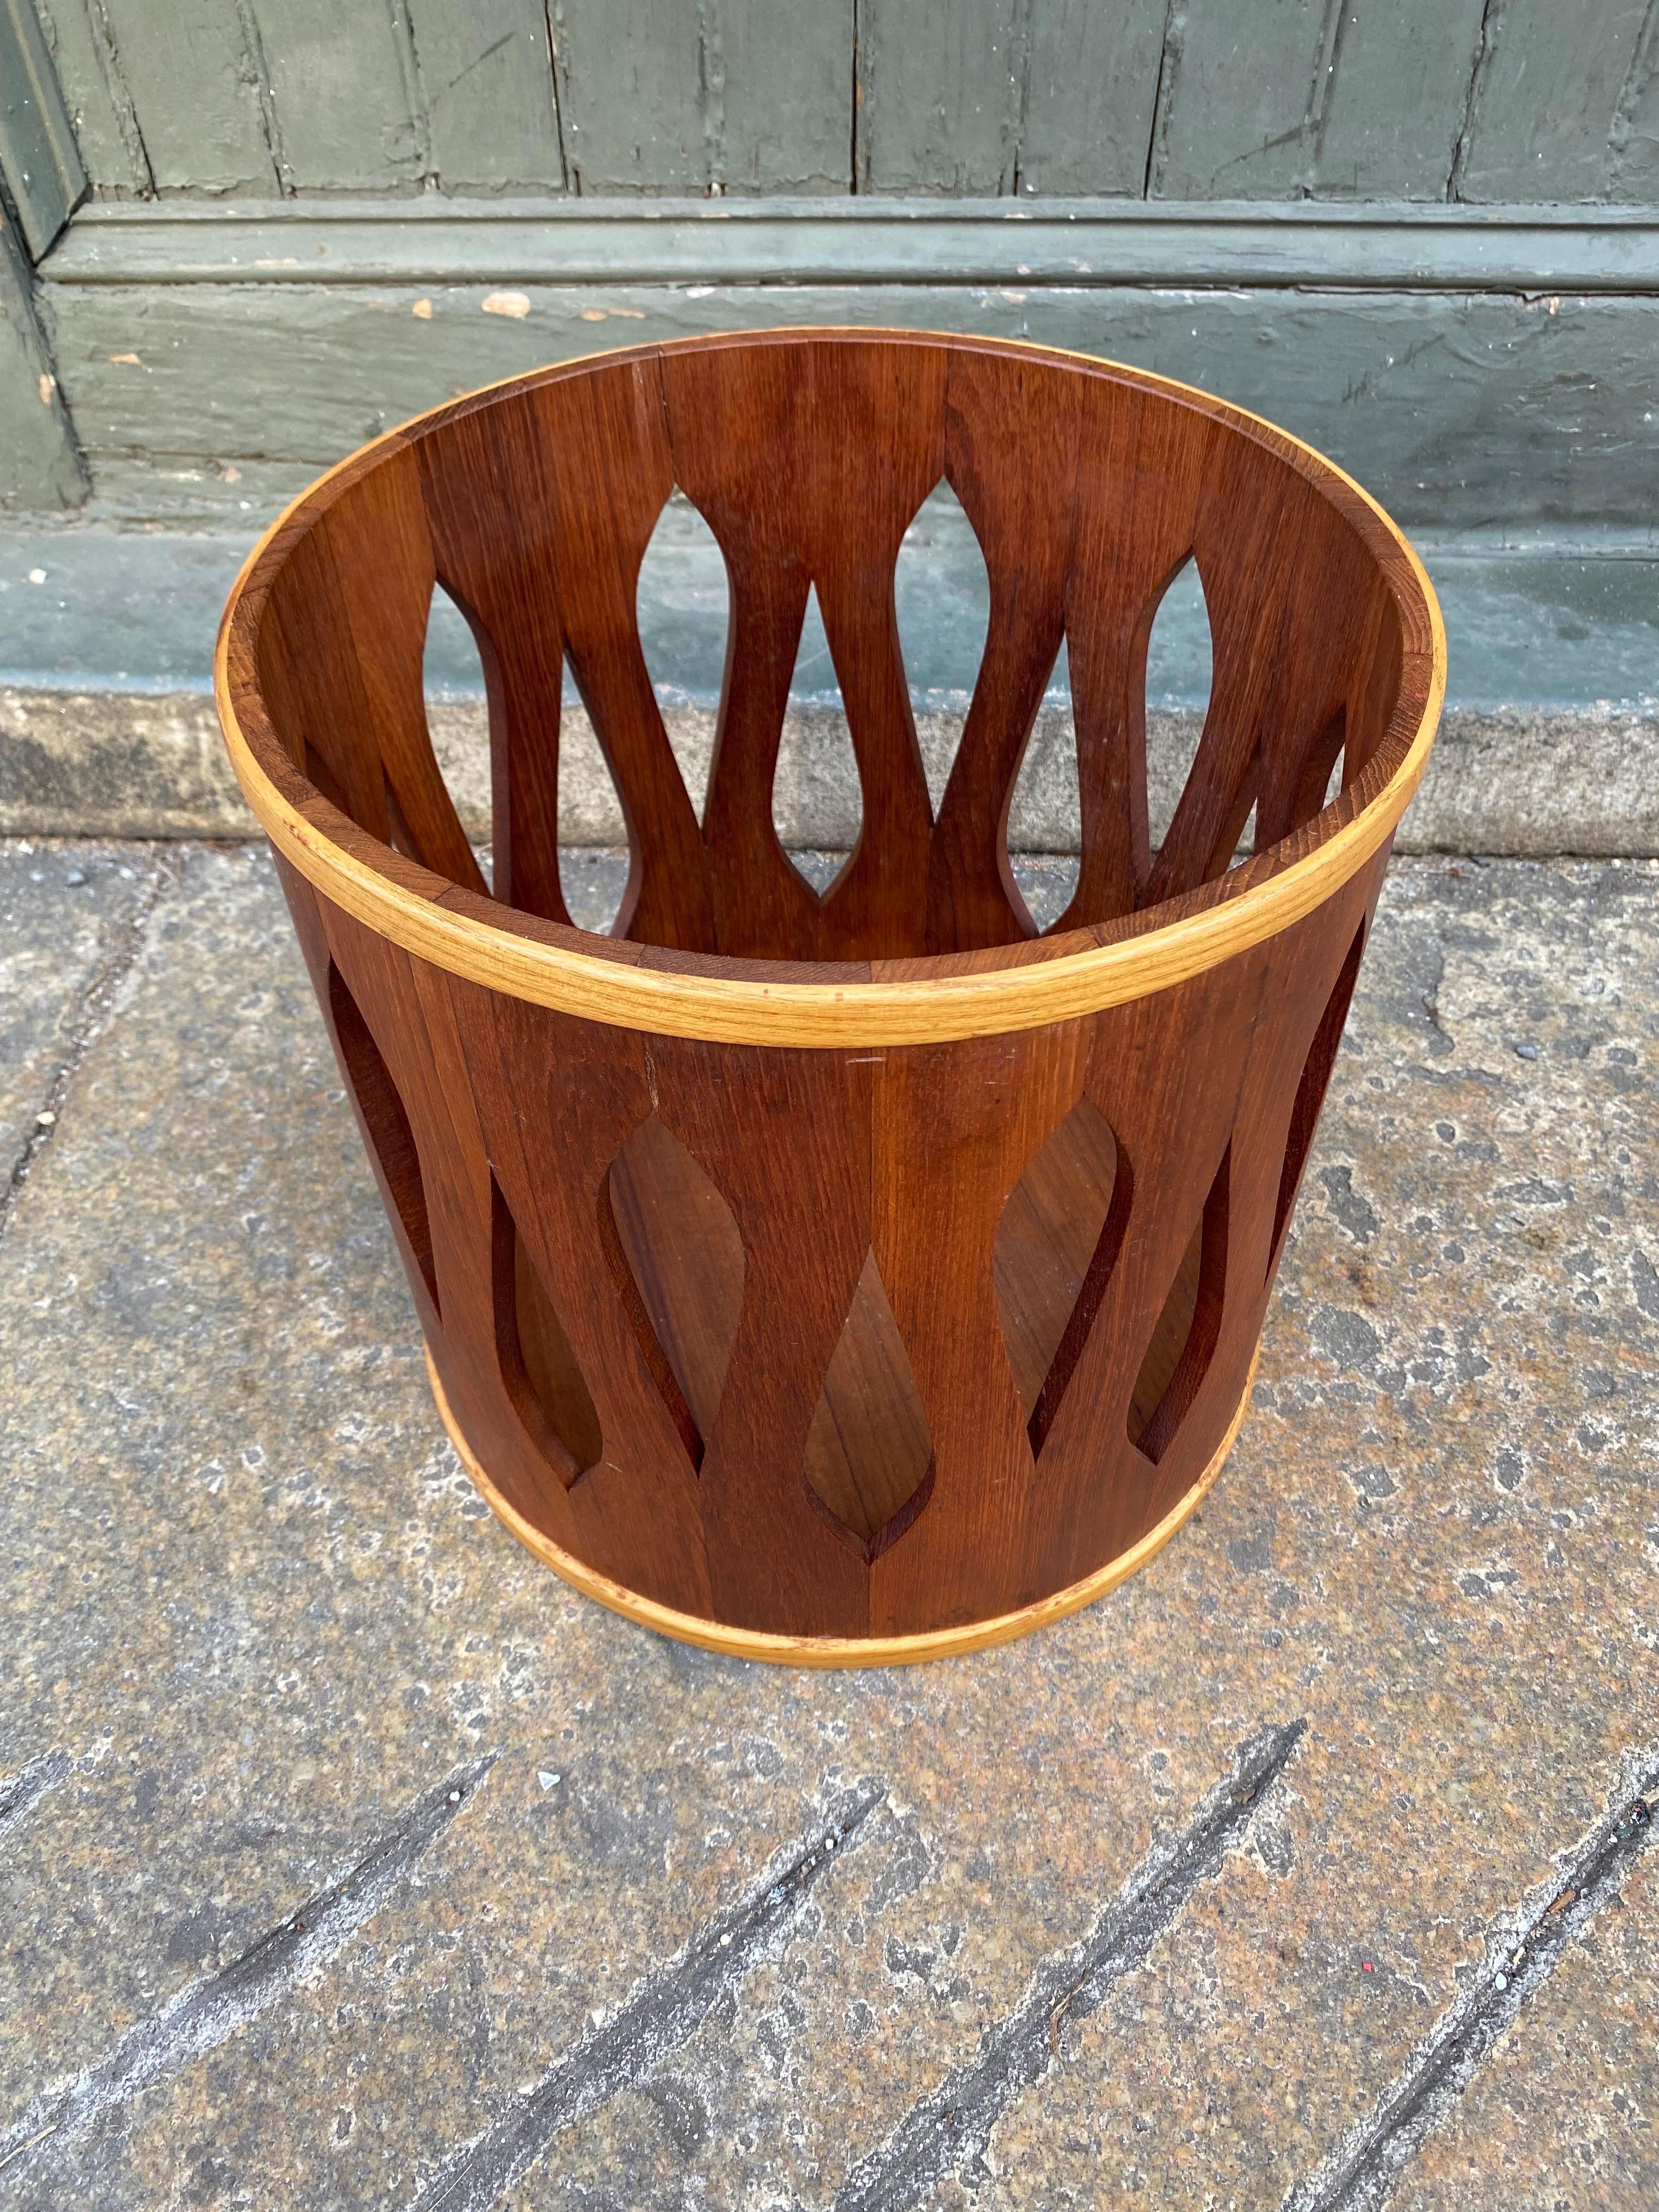 Jens Quistgaard for Dansk teak basket. Perfect to use for rolled towels, magazines or as a waste basket. Early form, hard to find! Great original condition! Signed to bottom.